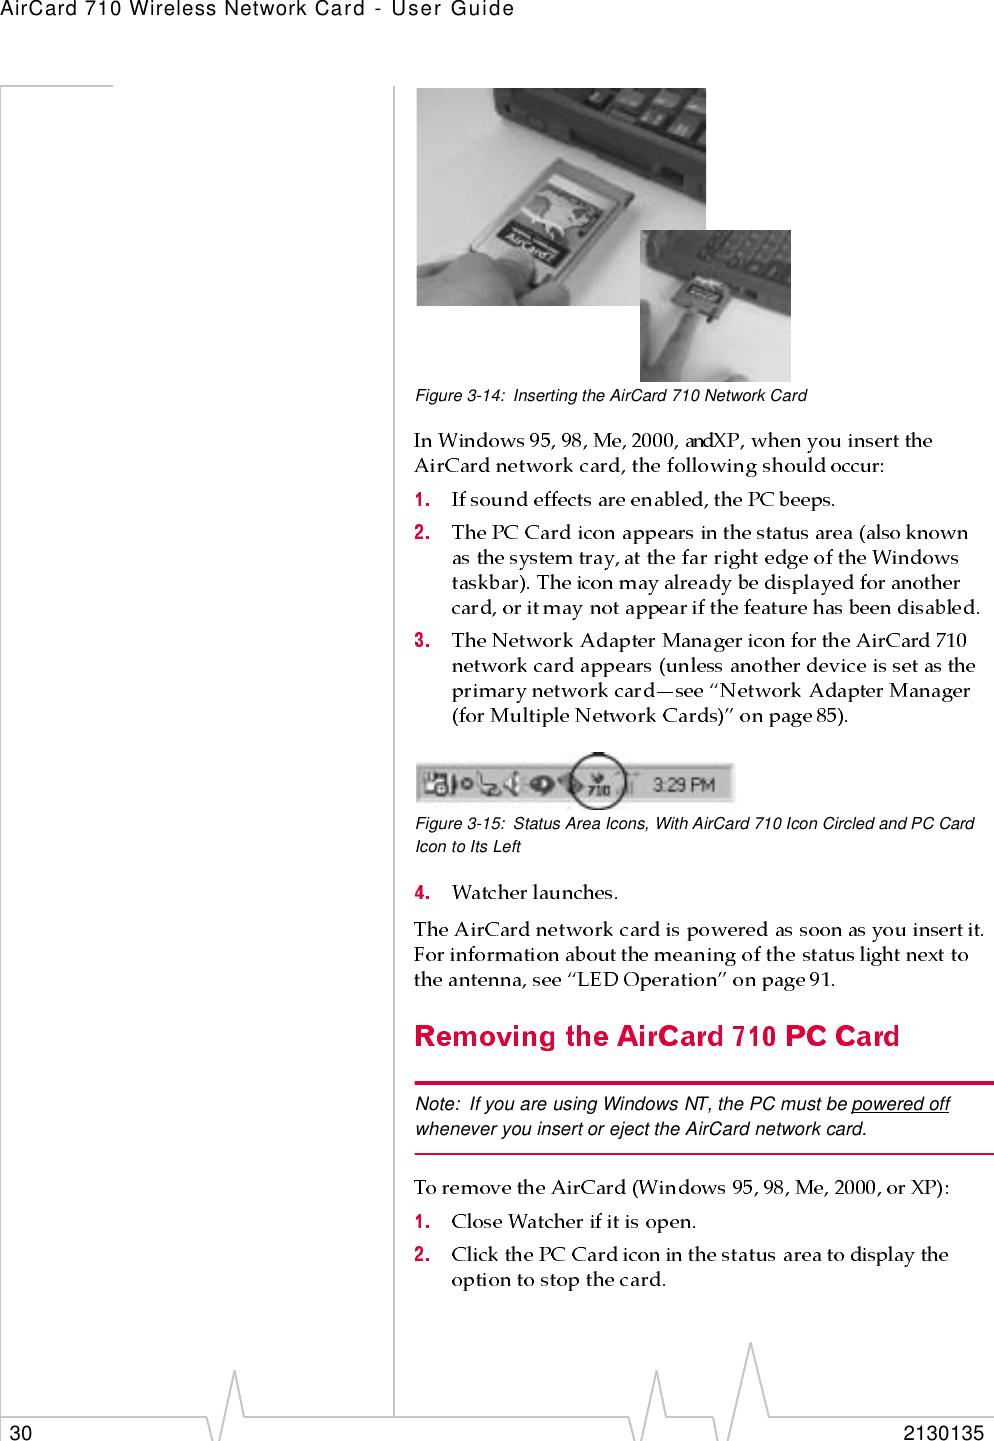 AirCard 710 Wireless Network Card - User Guide30 2130135Figure 3-14: Inserting the AirCard 710 Network CardFigure 3-15: Status Area Icons, With AirCard 710 Icon Circled and PC Card Icon to Its LeftNote: If you are using Windows NT, the PC must be powered off whenever you insert or eject the AirCard network card.